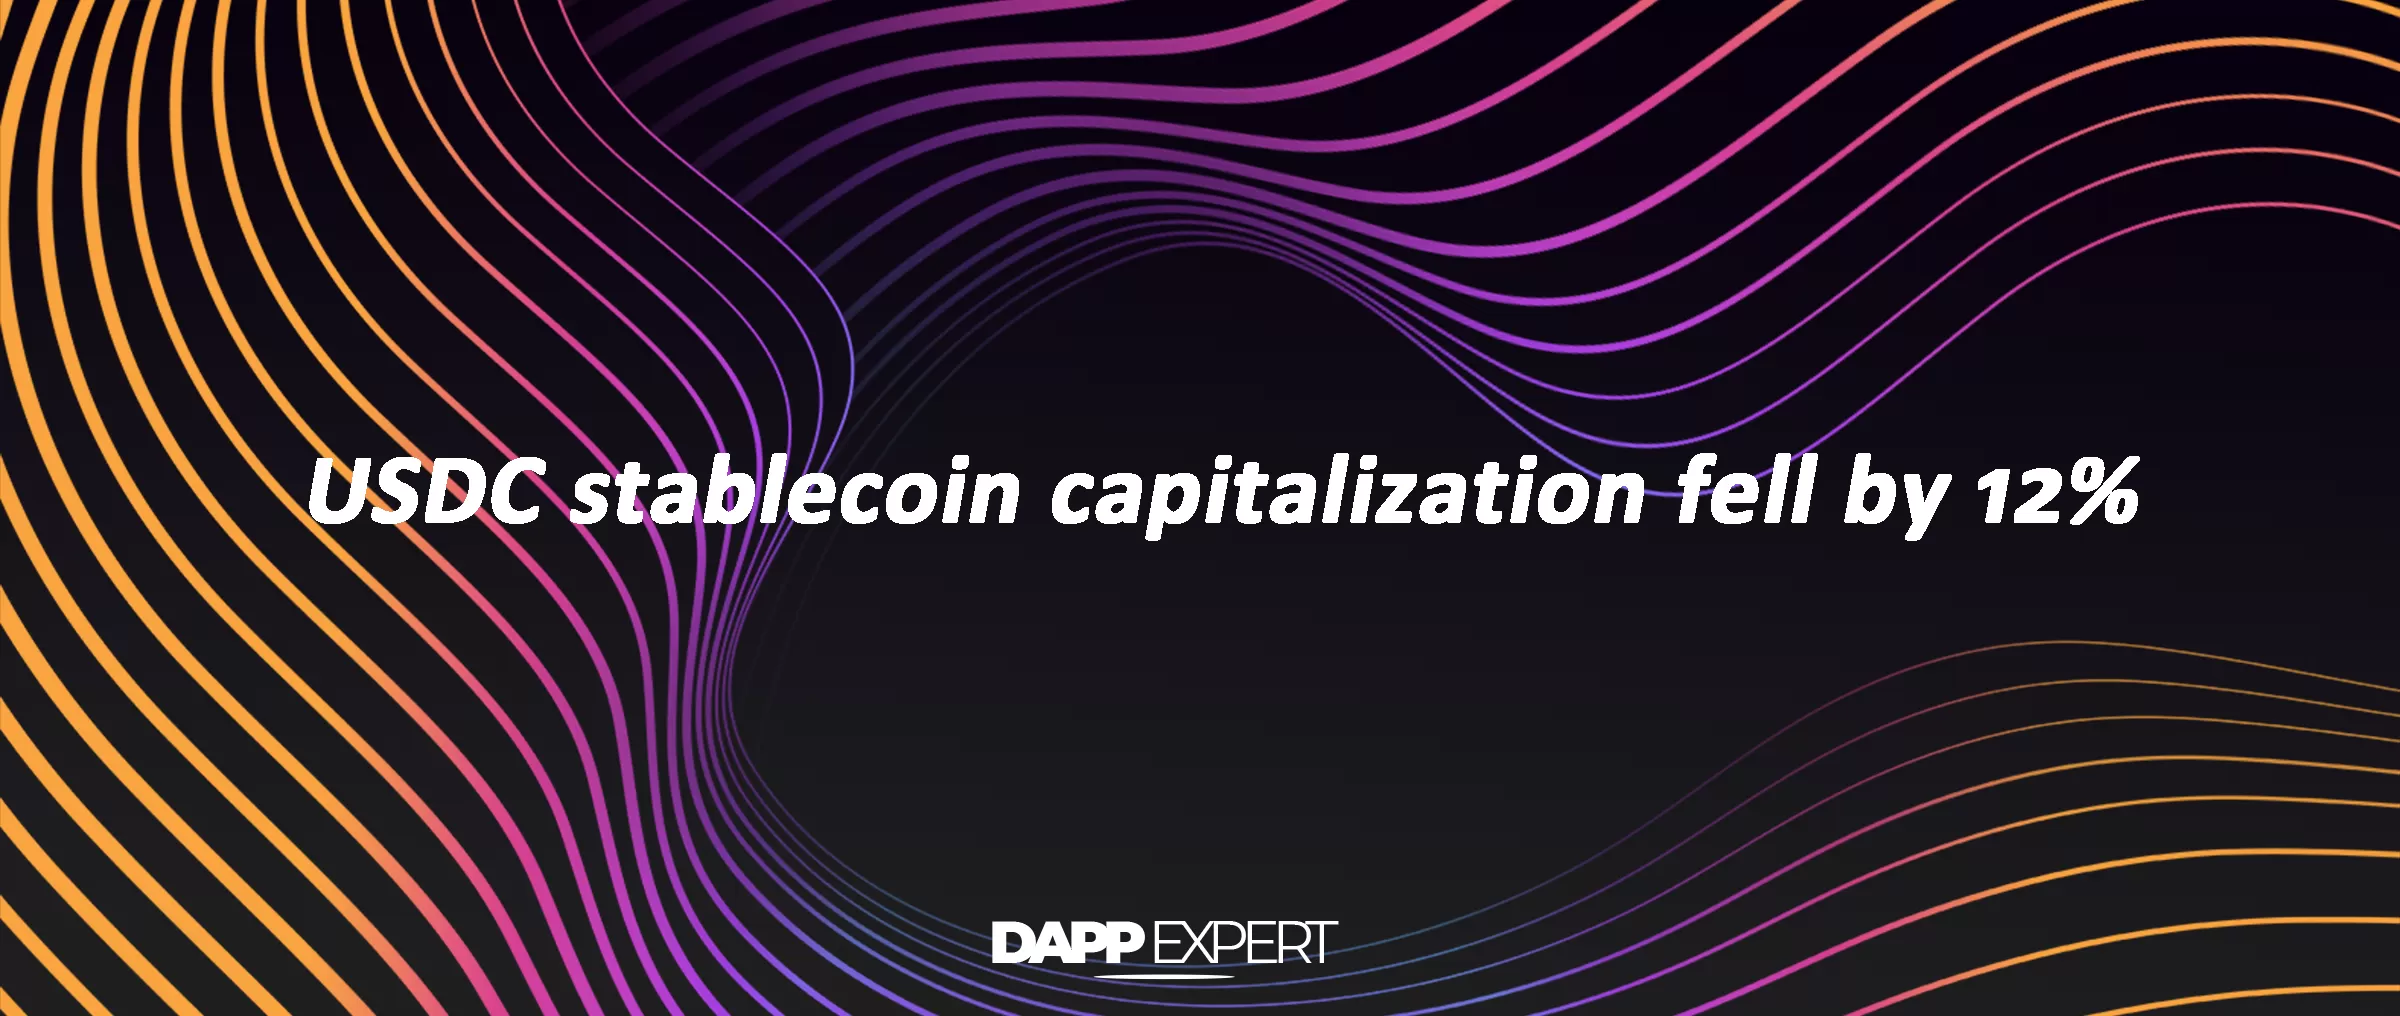 USDC stablecoin capitalization fell by 12%